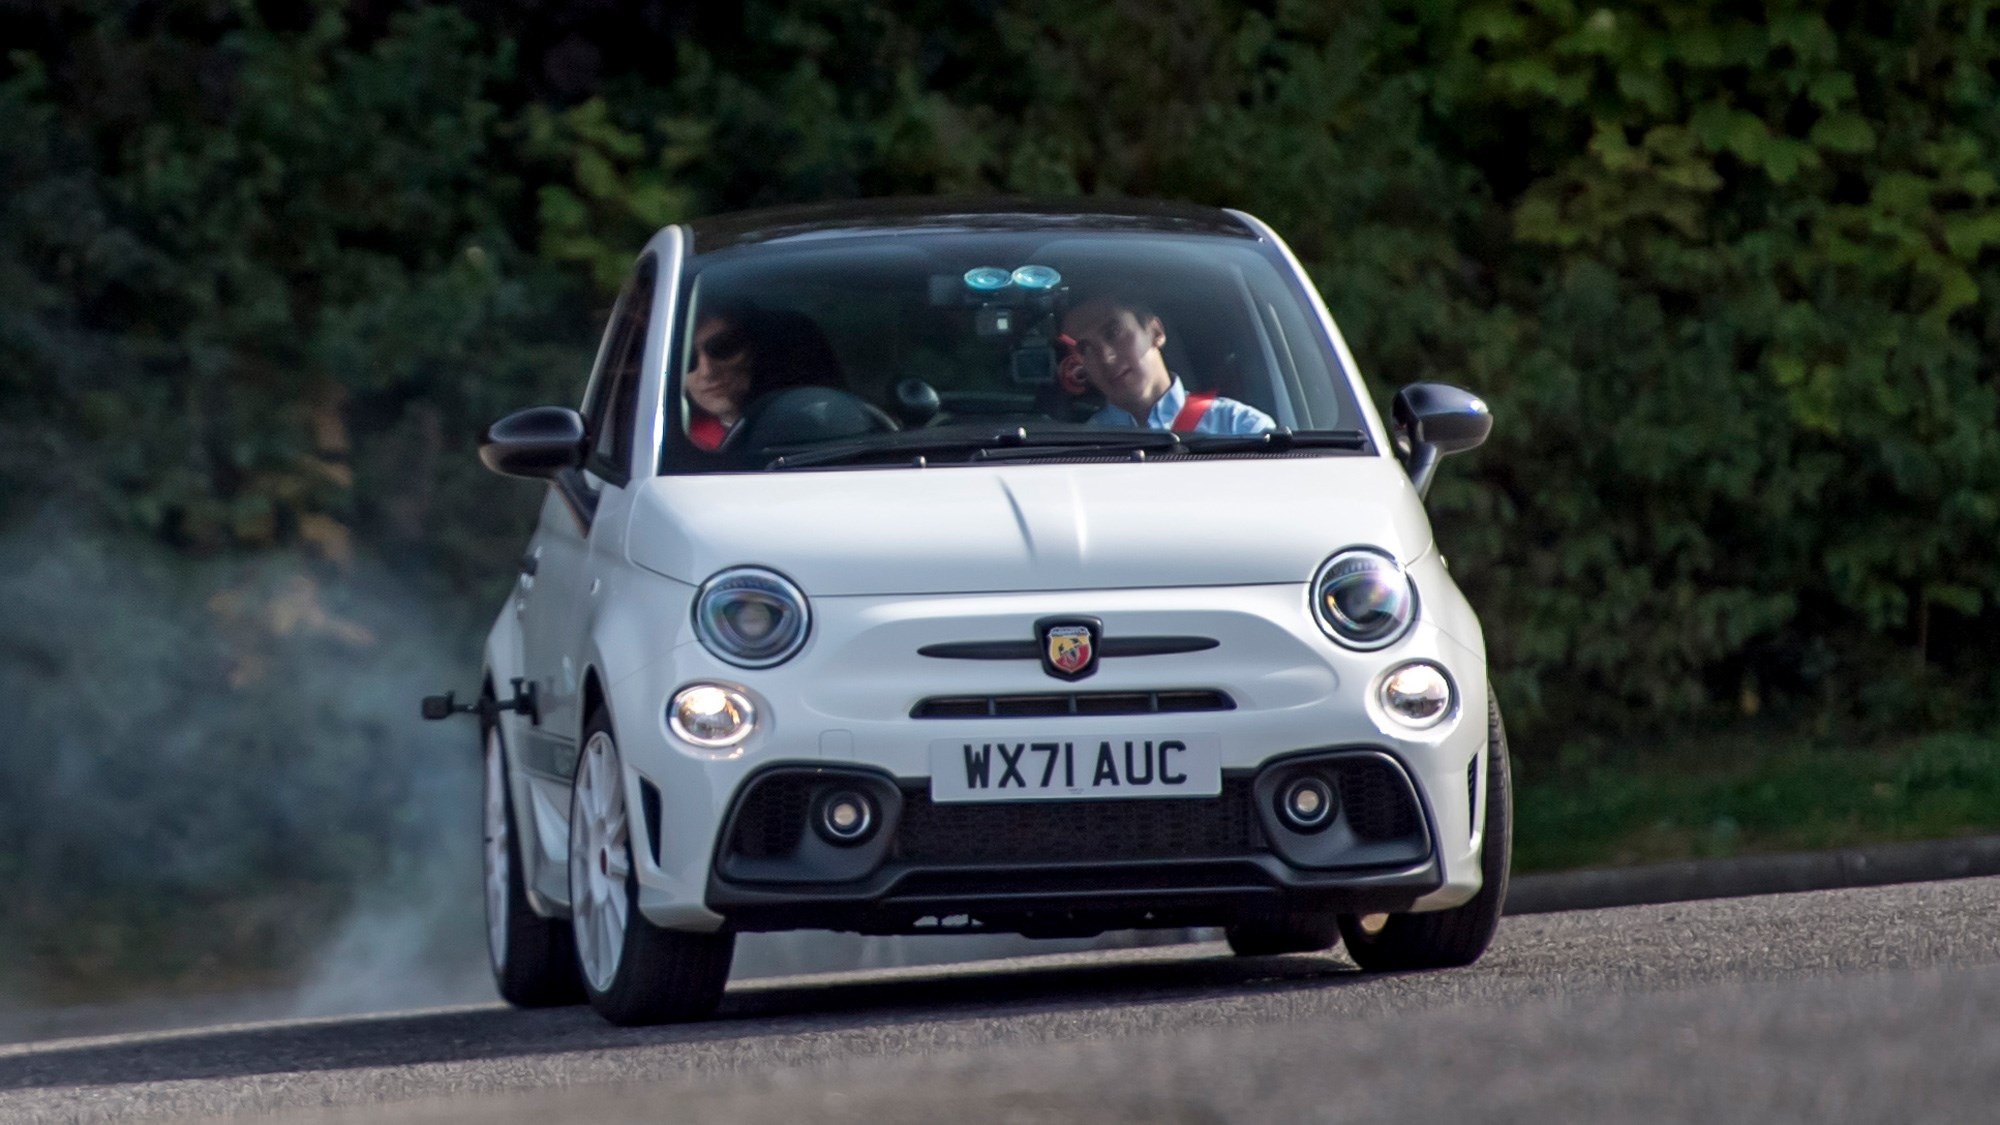 Is the Abarth 595 Competizione the wildest small car that yo - Driven Car  Guide